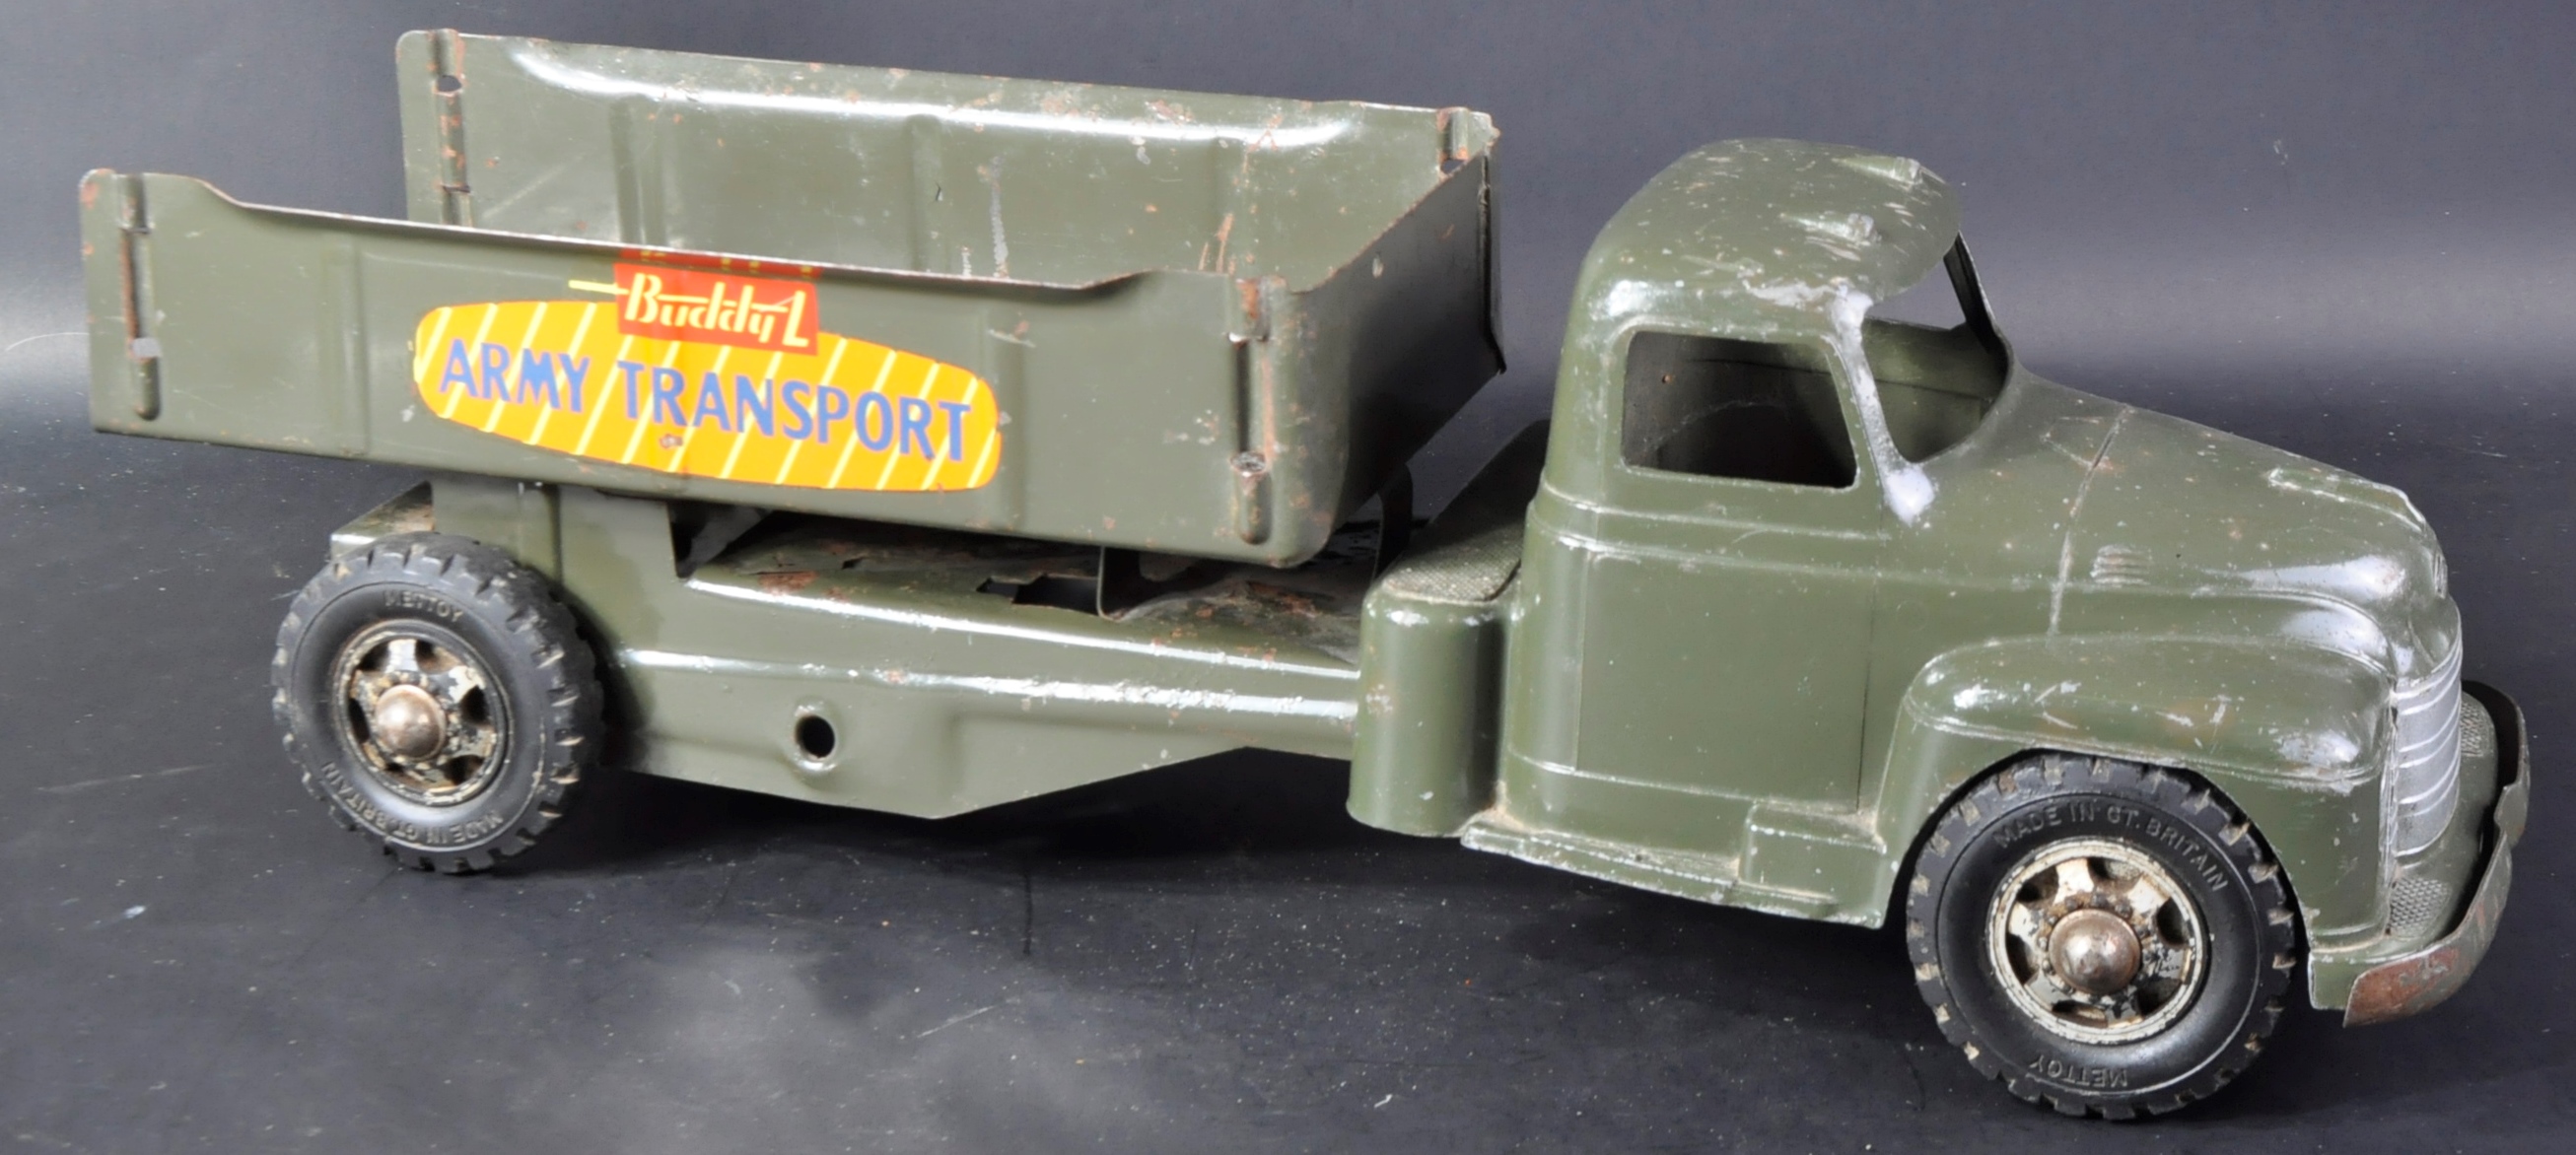 VINTAGE ' BUDDY L ' AMERICAN ARMY TRANSPORT TRUCK - Image 6 of 6